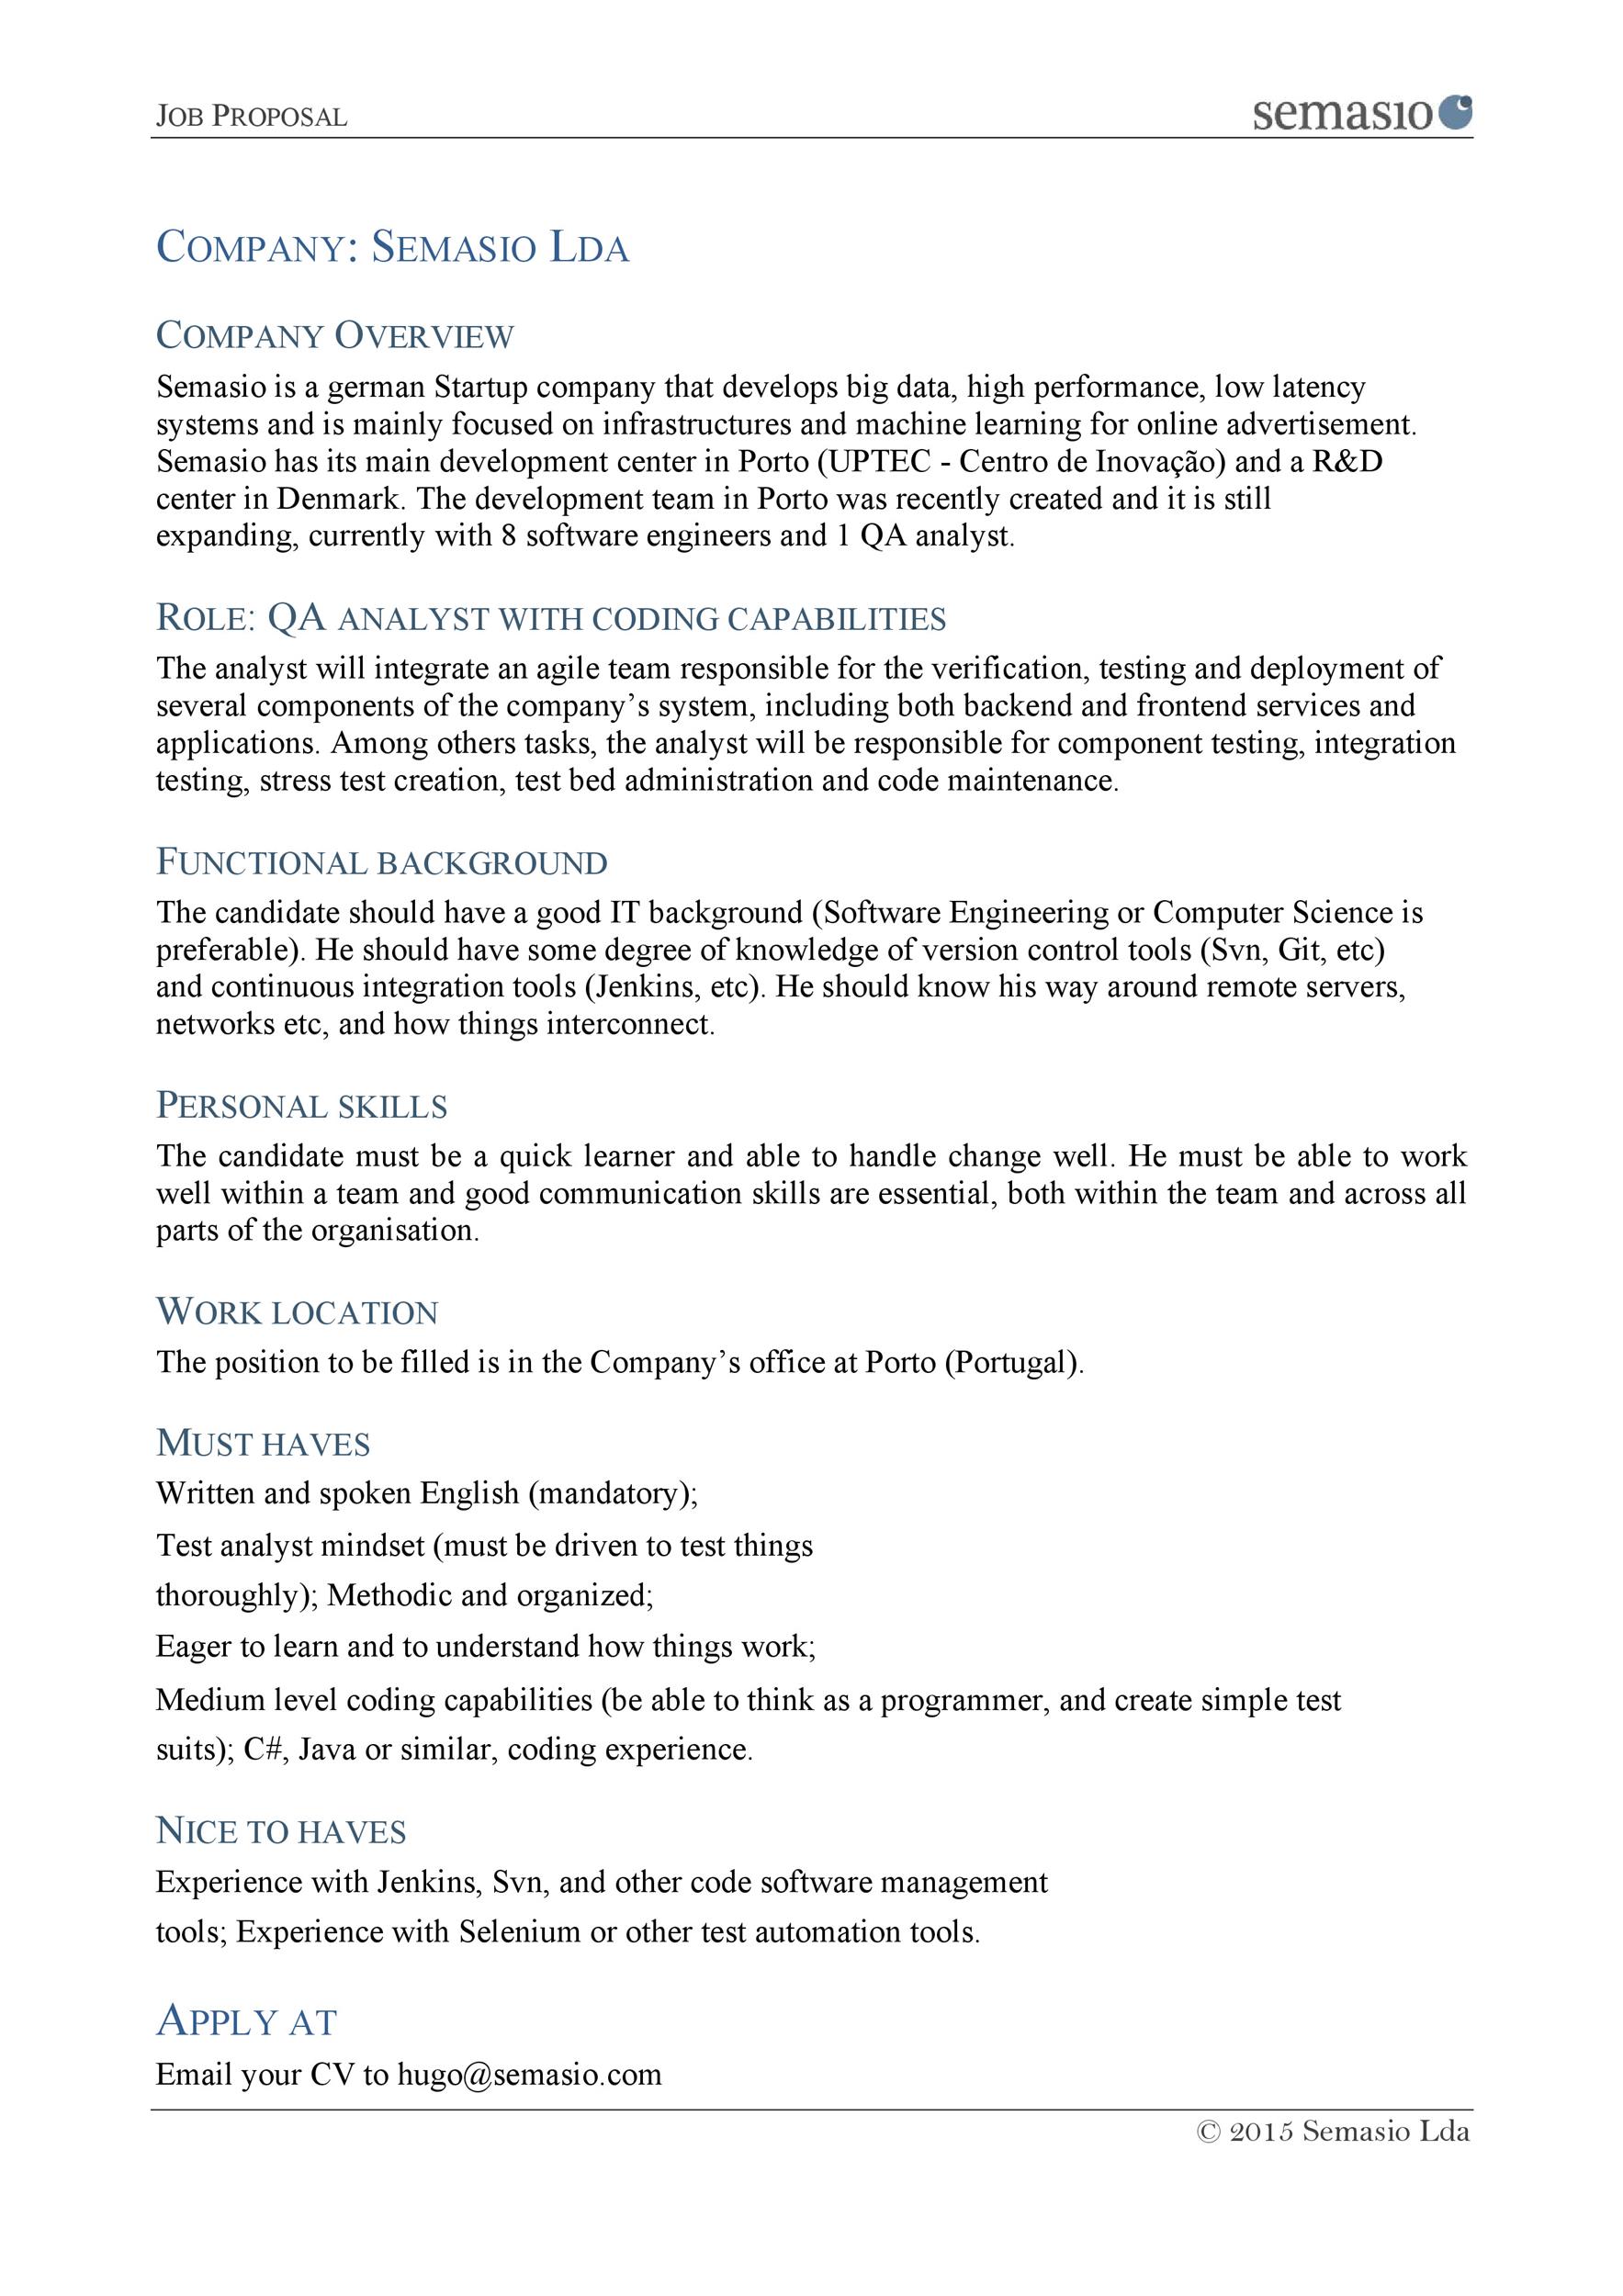 Hiring Proposal Letter from templatelab.com